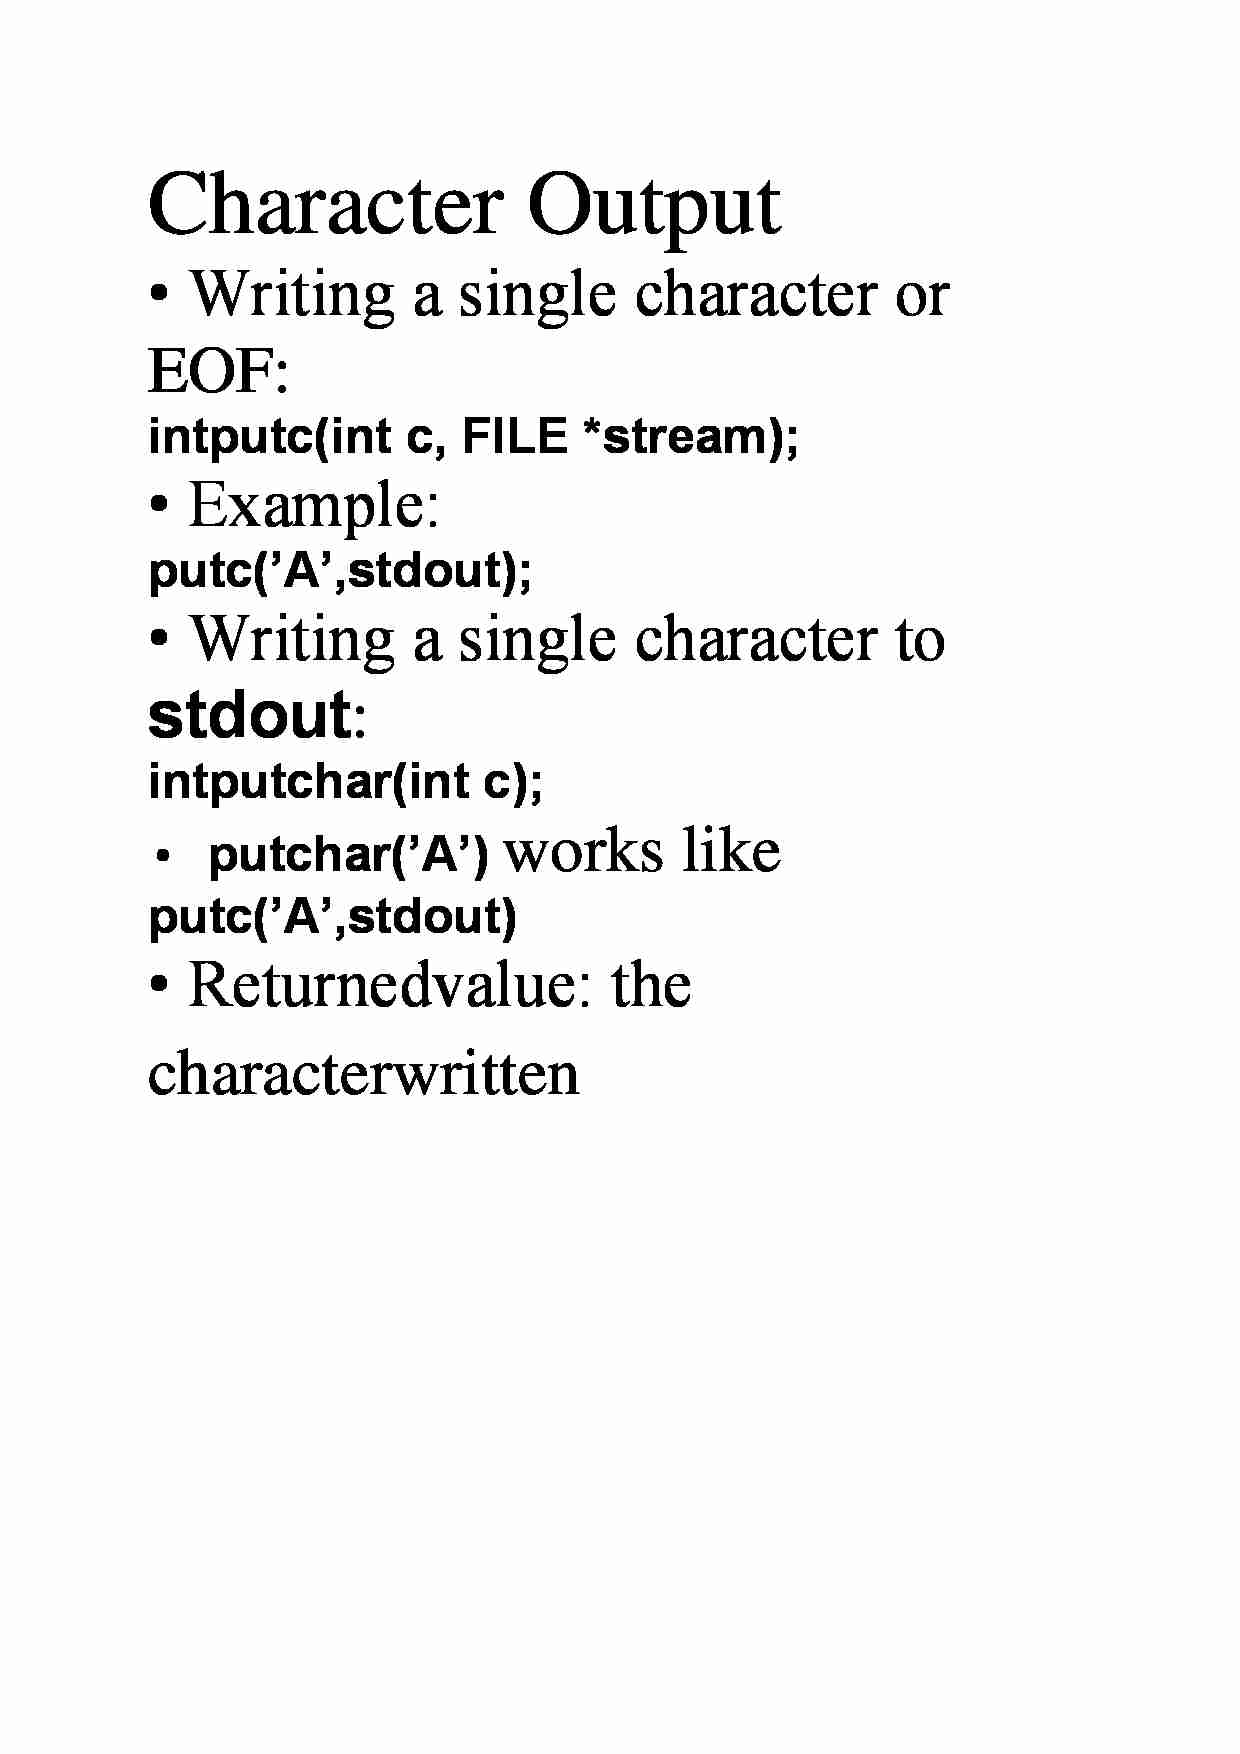 Character Output - examples - strona 1